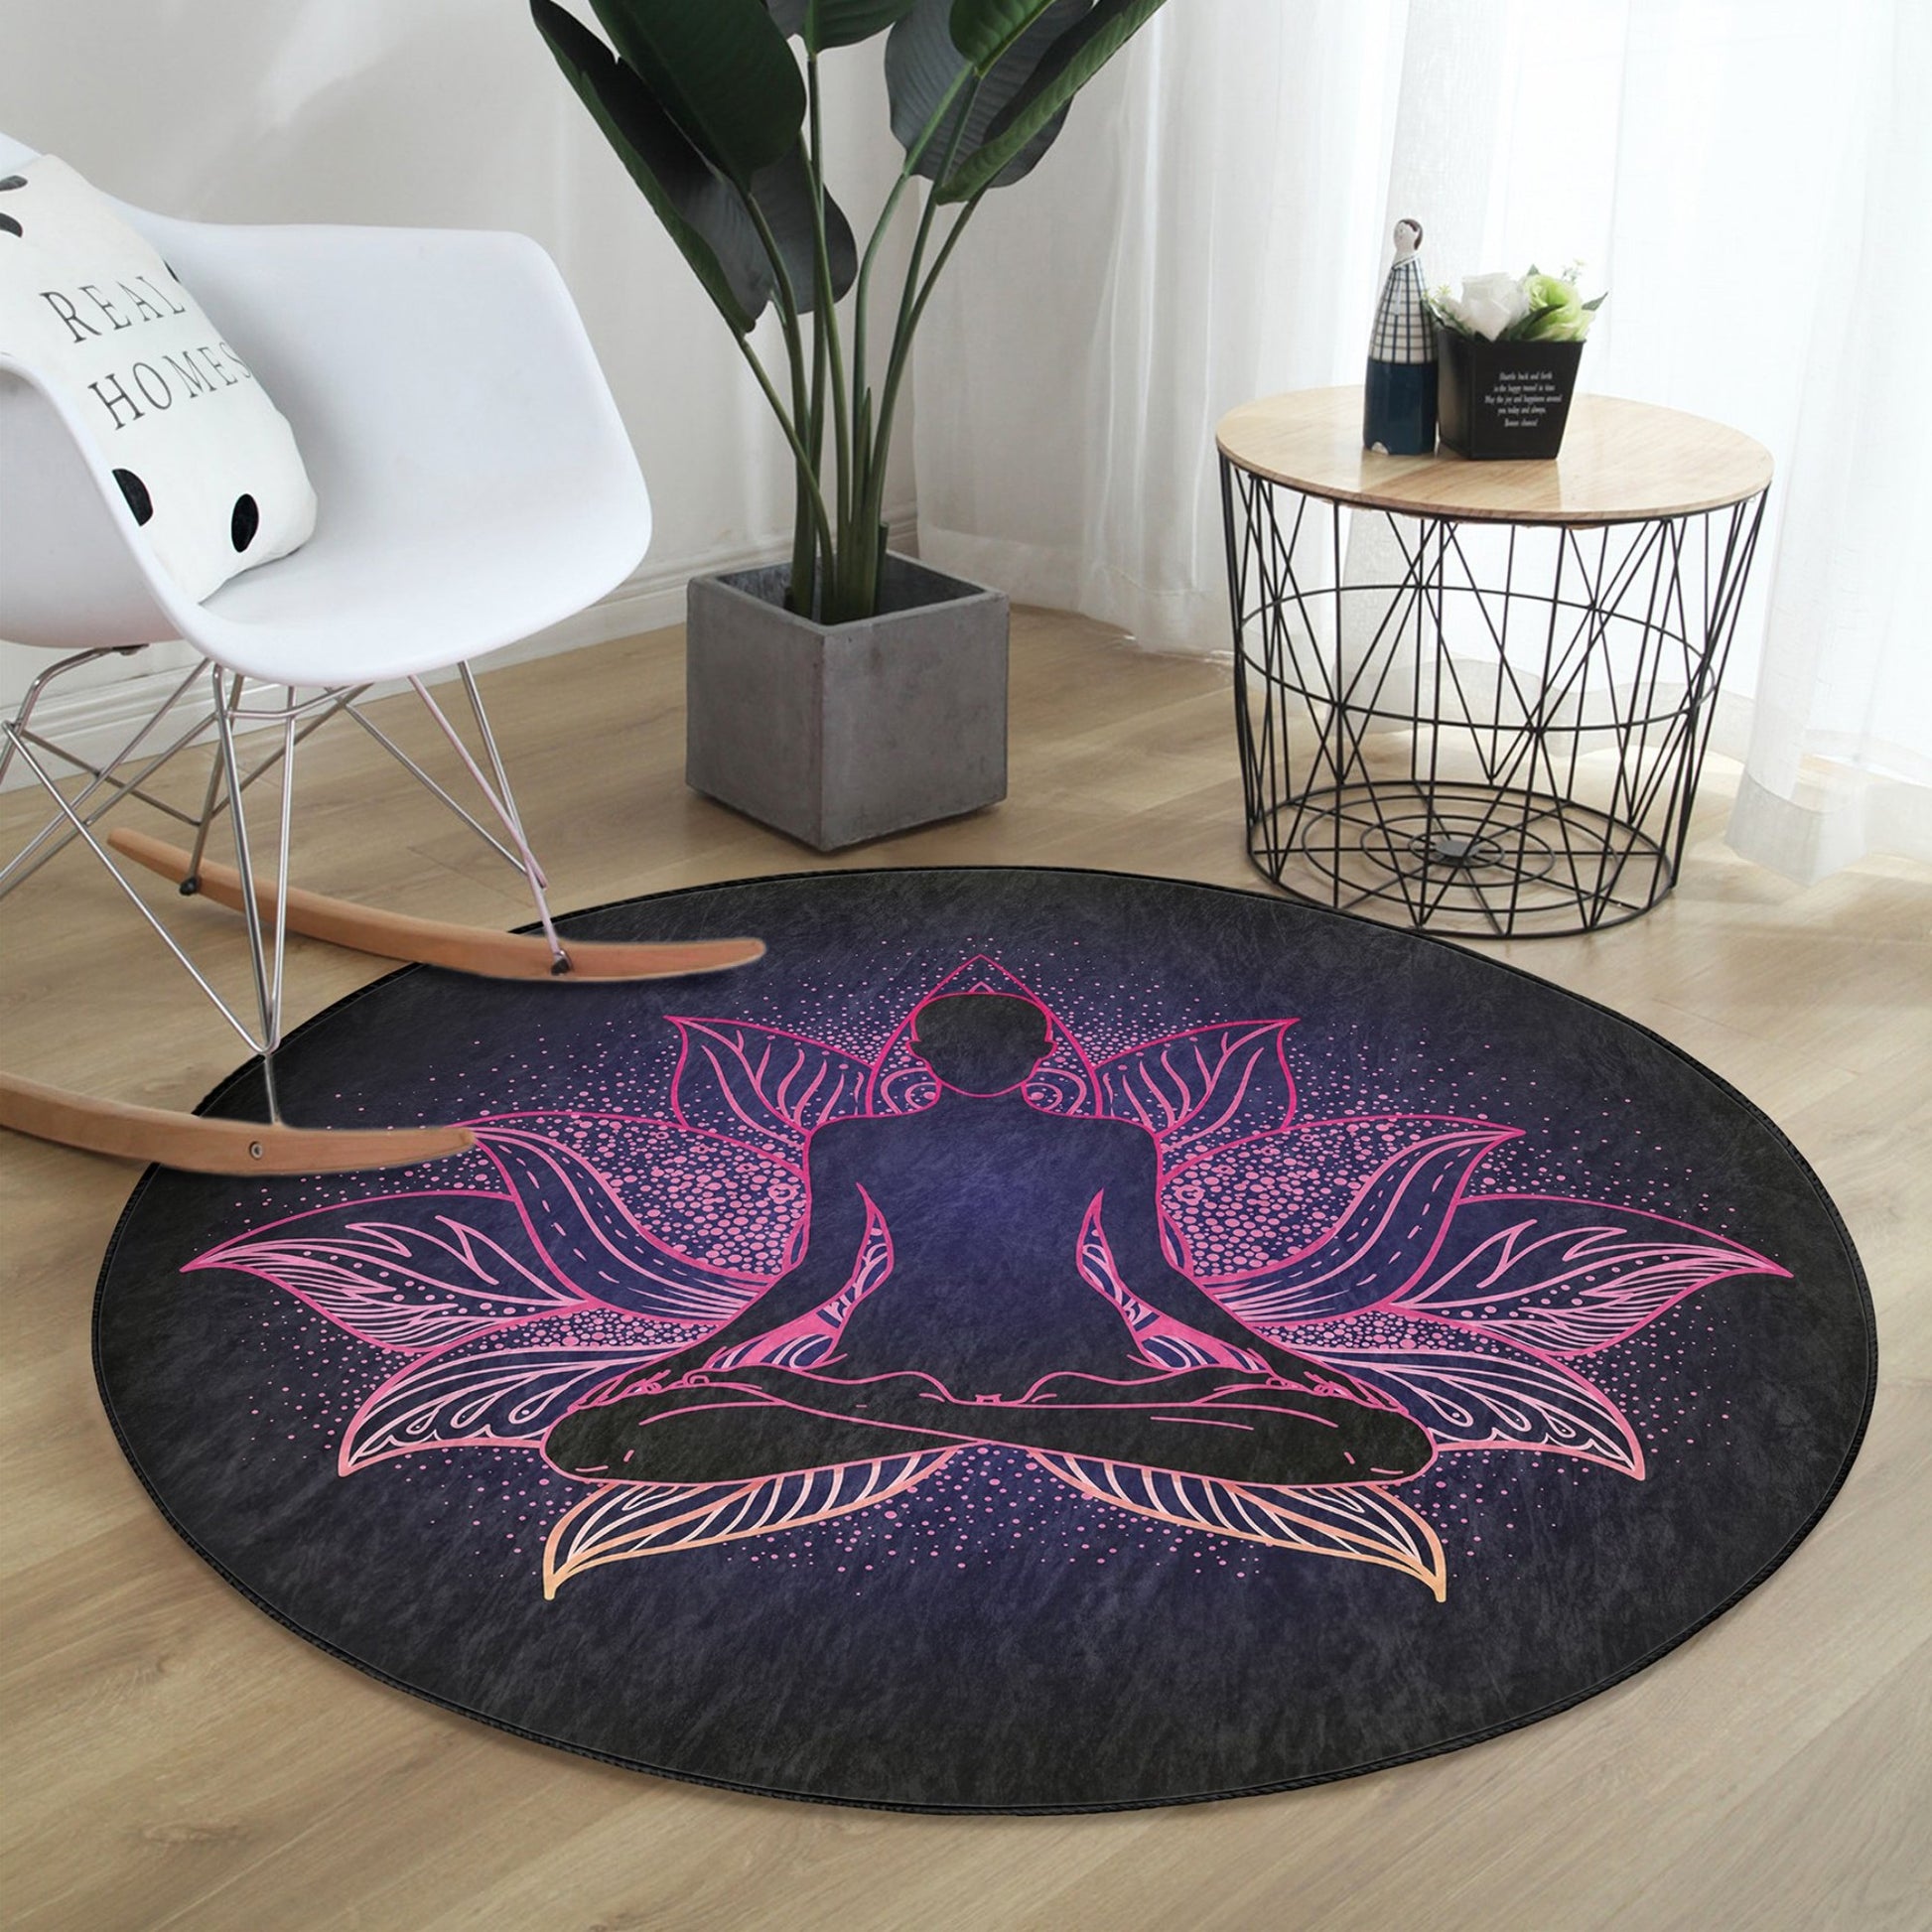 Washable Rug with Lotus Flower Pattern - Easy Maintenance